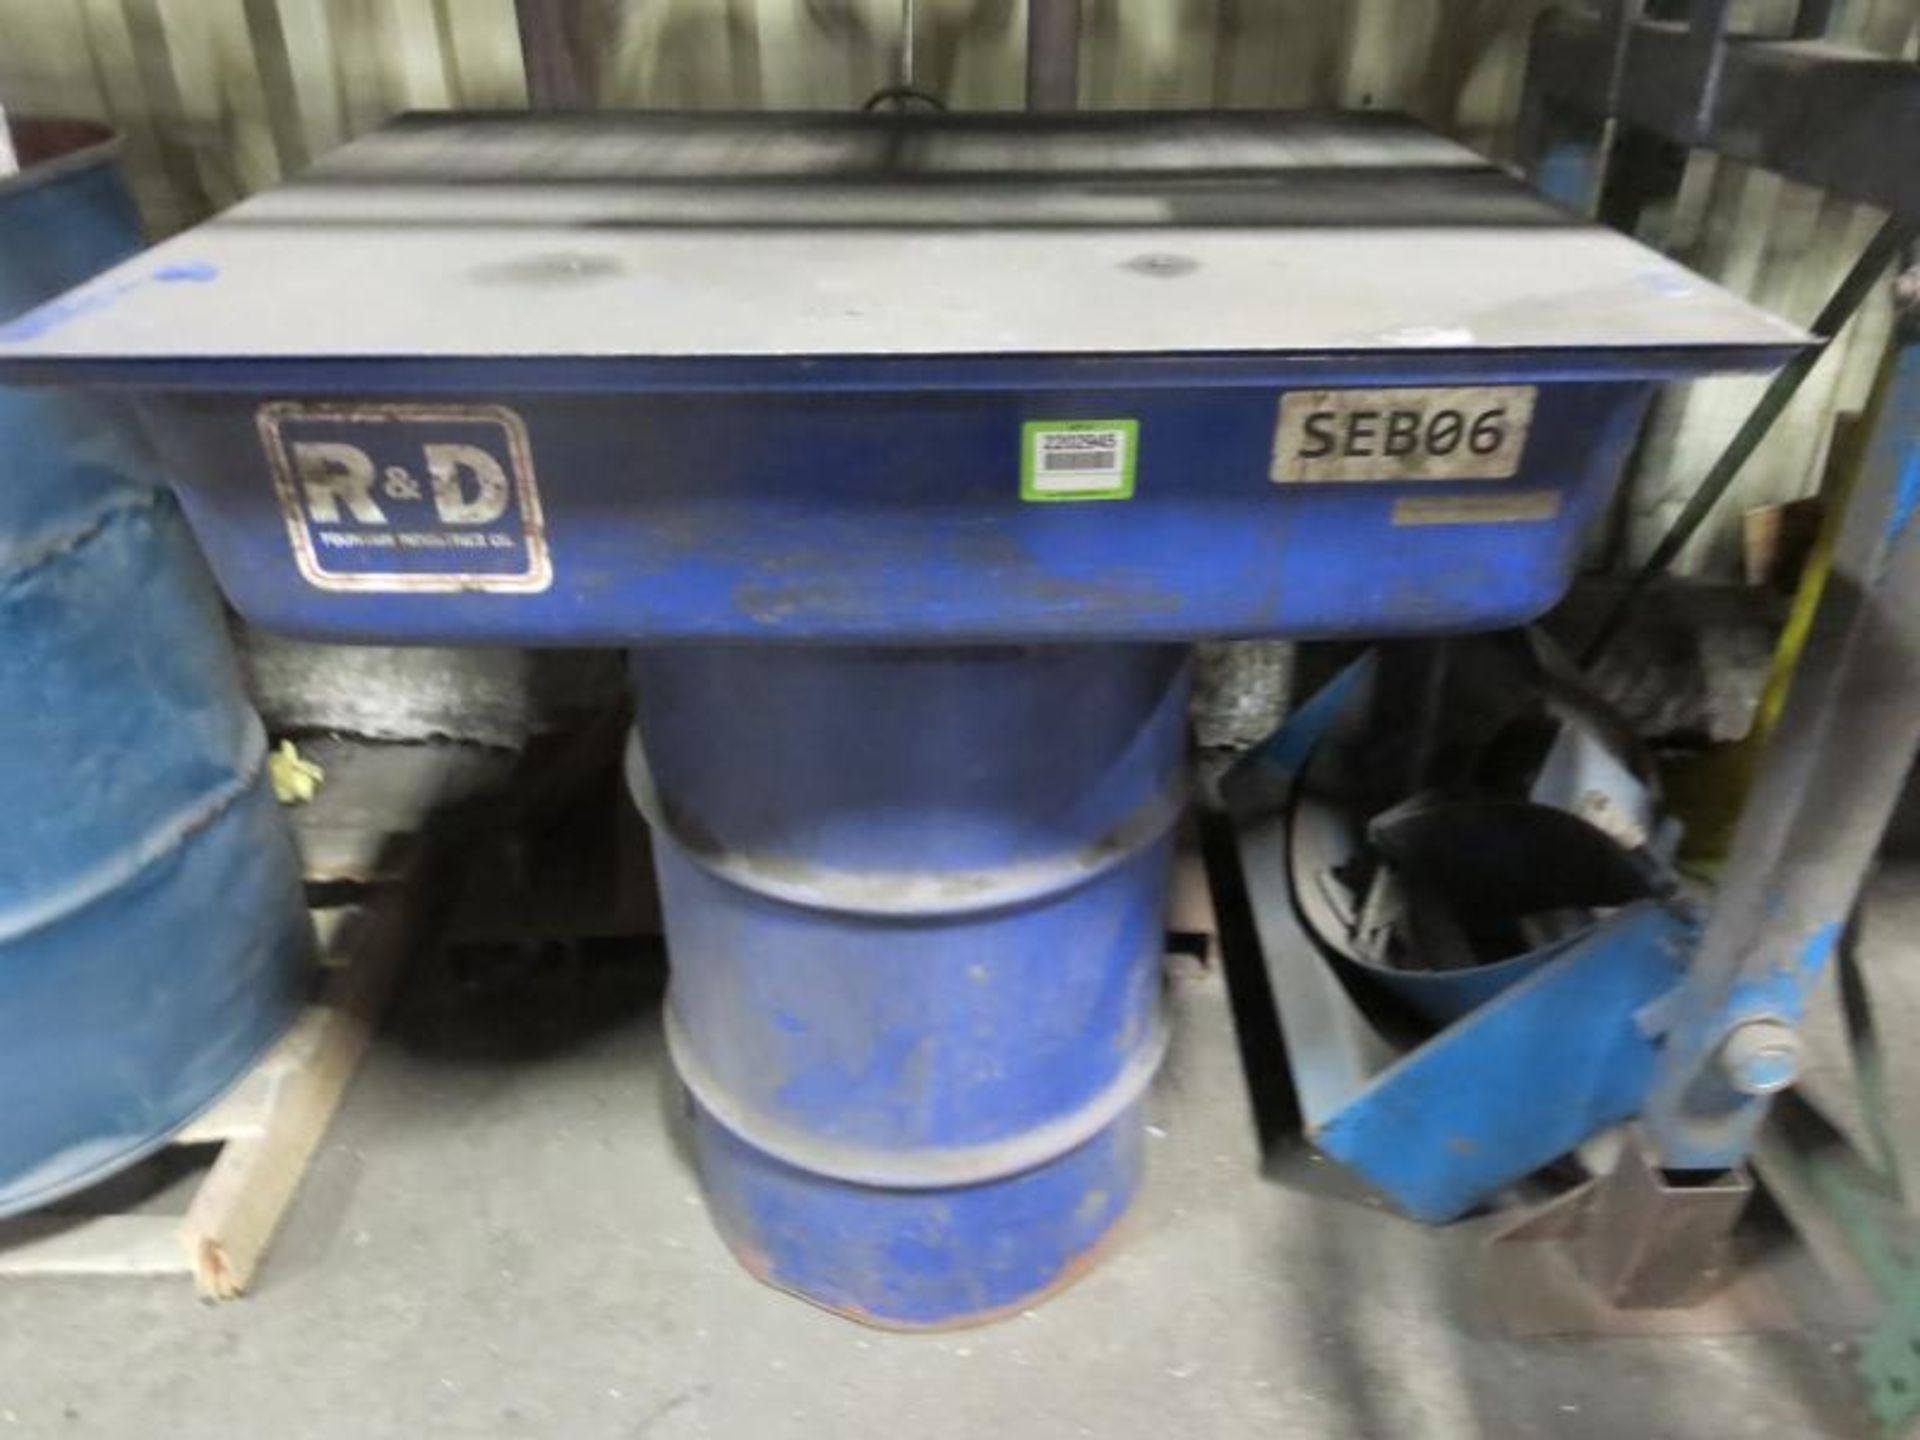 R & D Industries Parts Cleaner, 25ga. Hit # 2202945. Bldg.1.16.2 Asset Located at 820 S Post Rd,